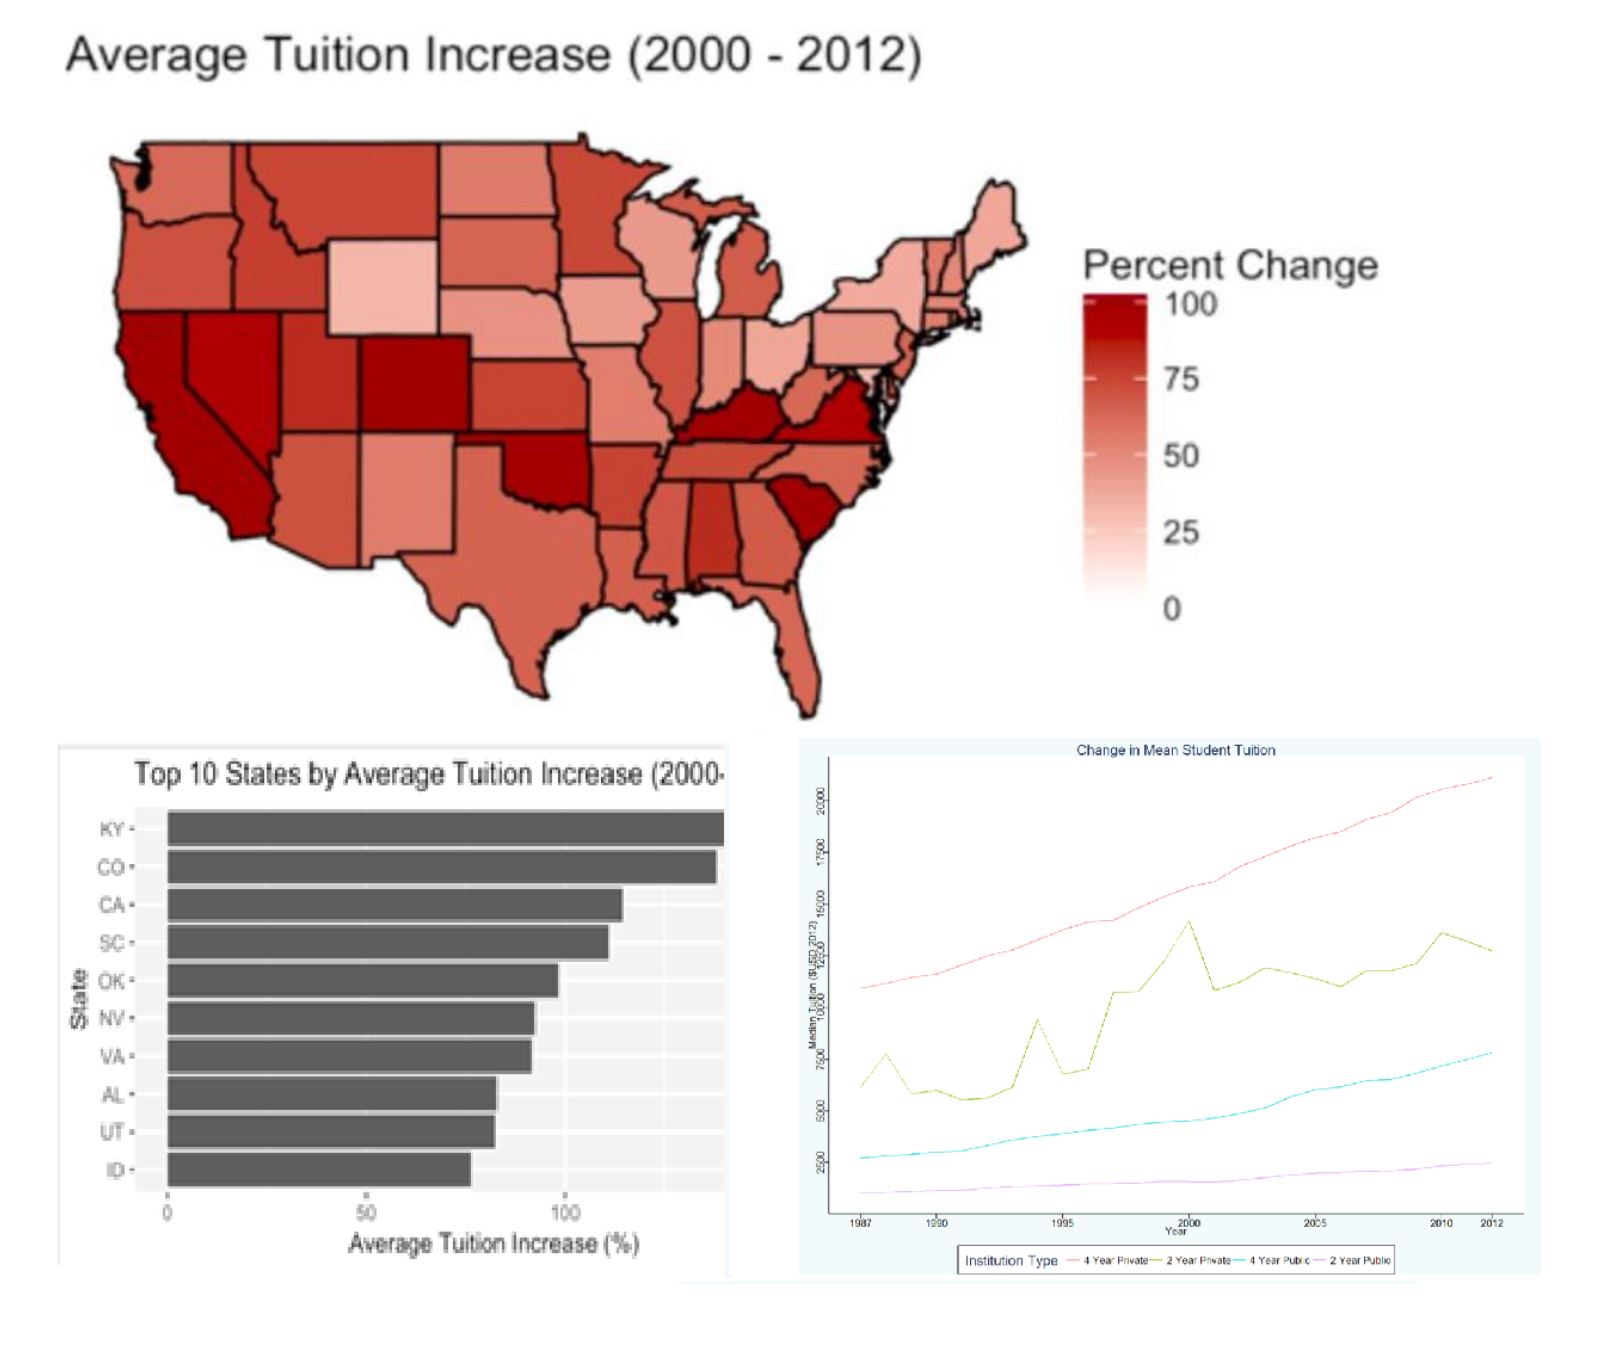 Various information about the effects of rising tuition on American students